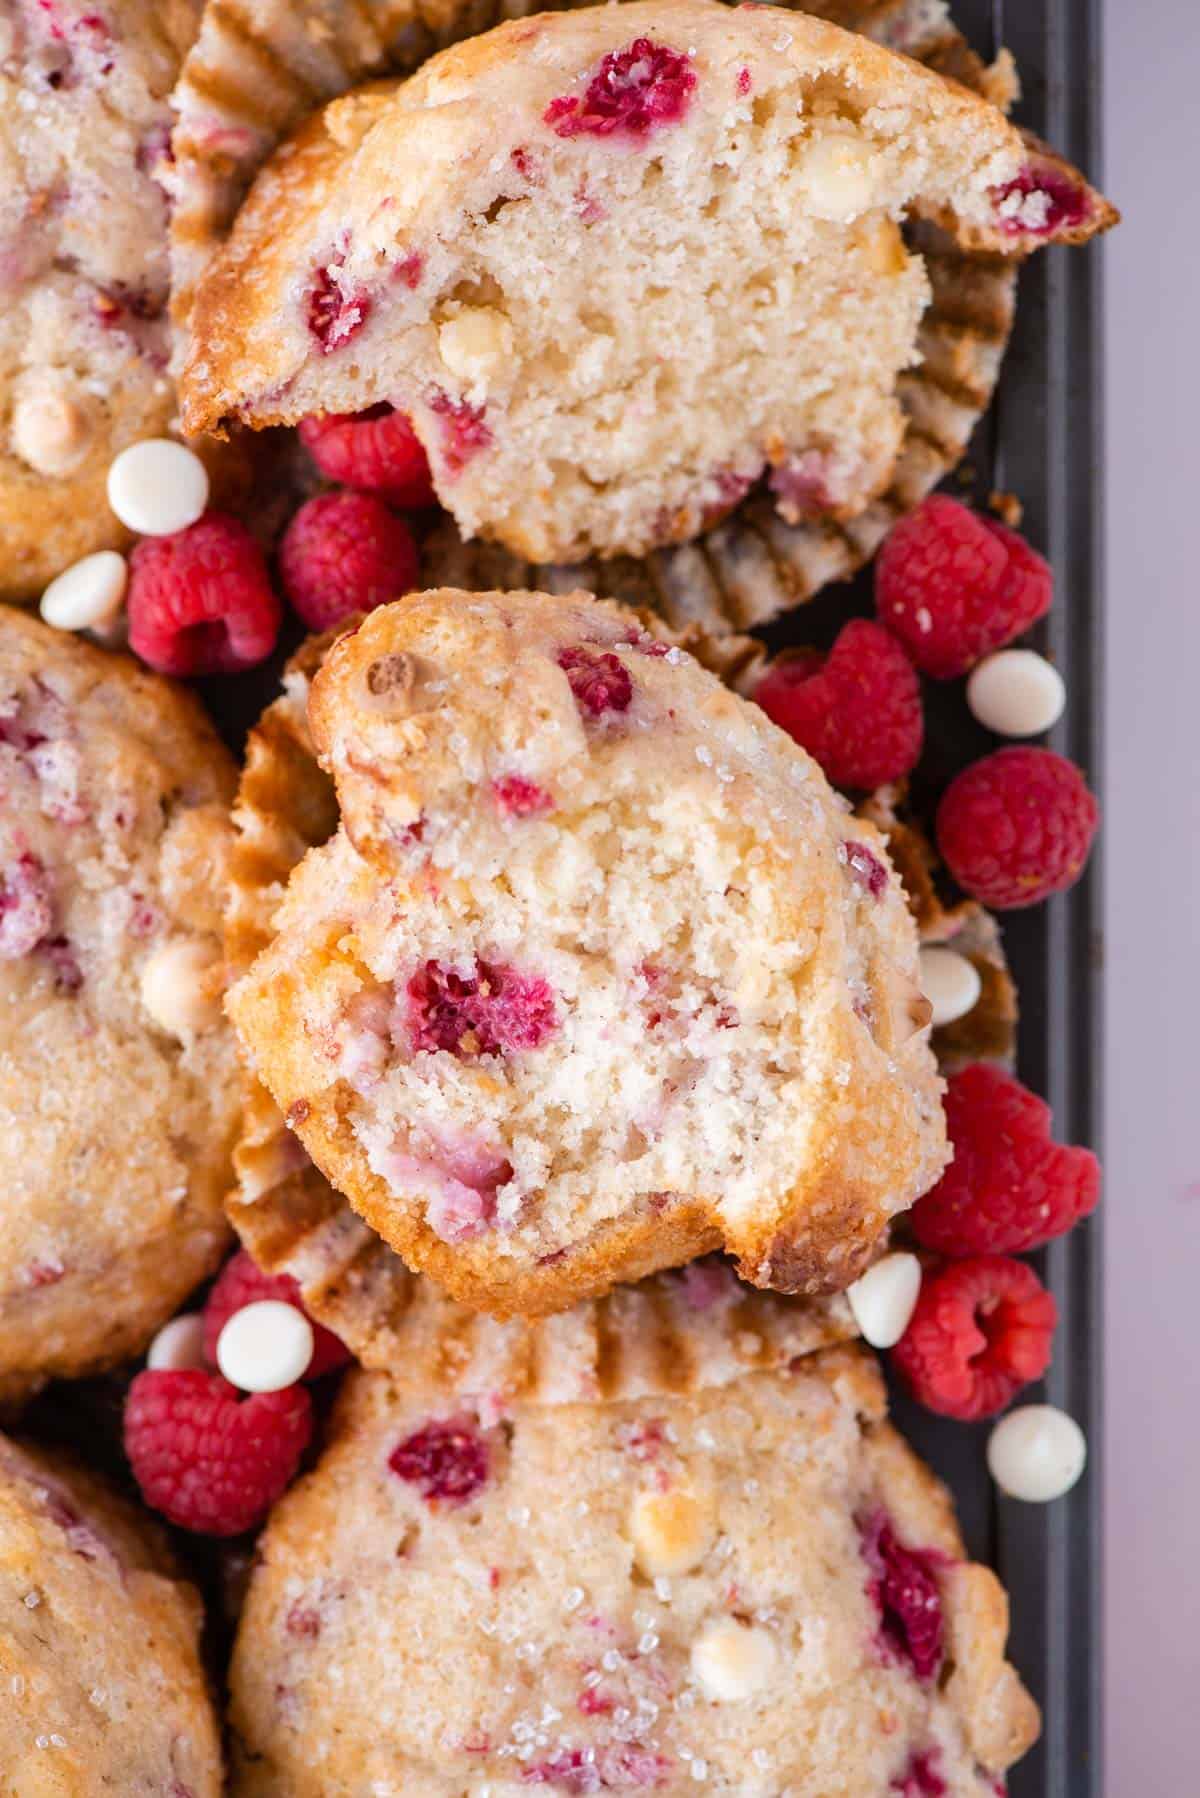 a raspberry white chocolate muffin cut in half on top of a pile of more whole raspberry muffins, fresh raspberries and white chocolate chips